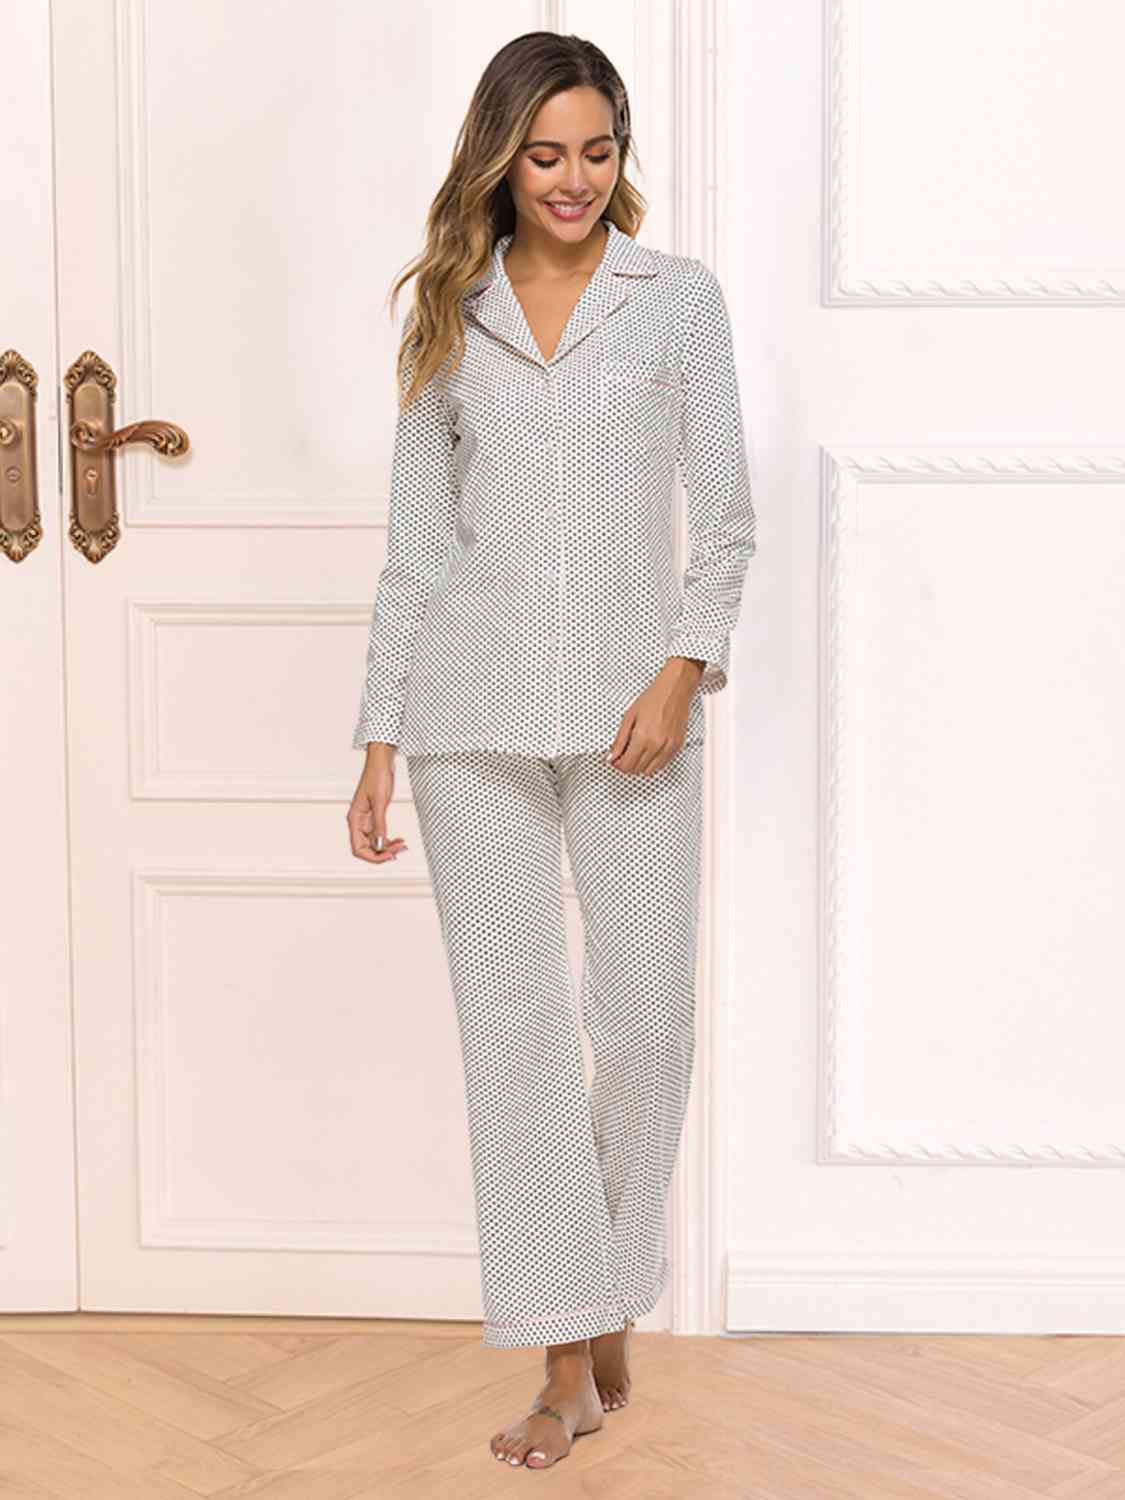 Collared Neck Loungewear Set with Pocket